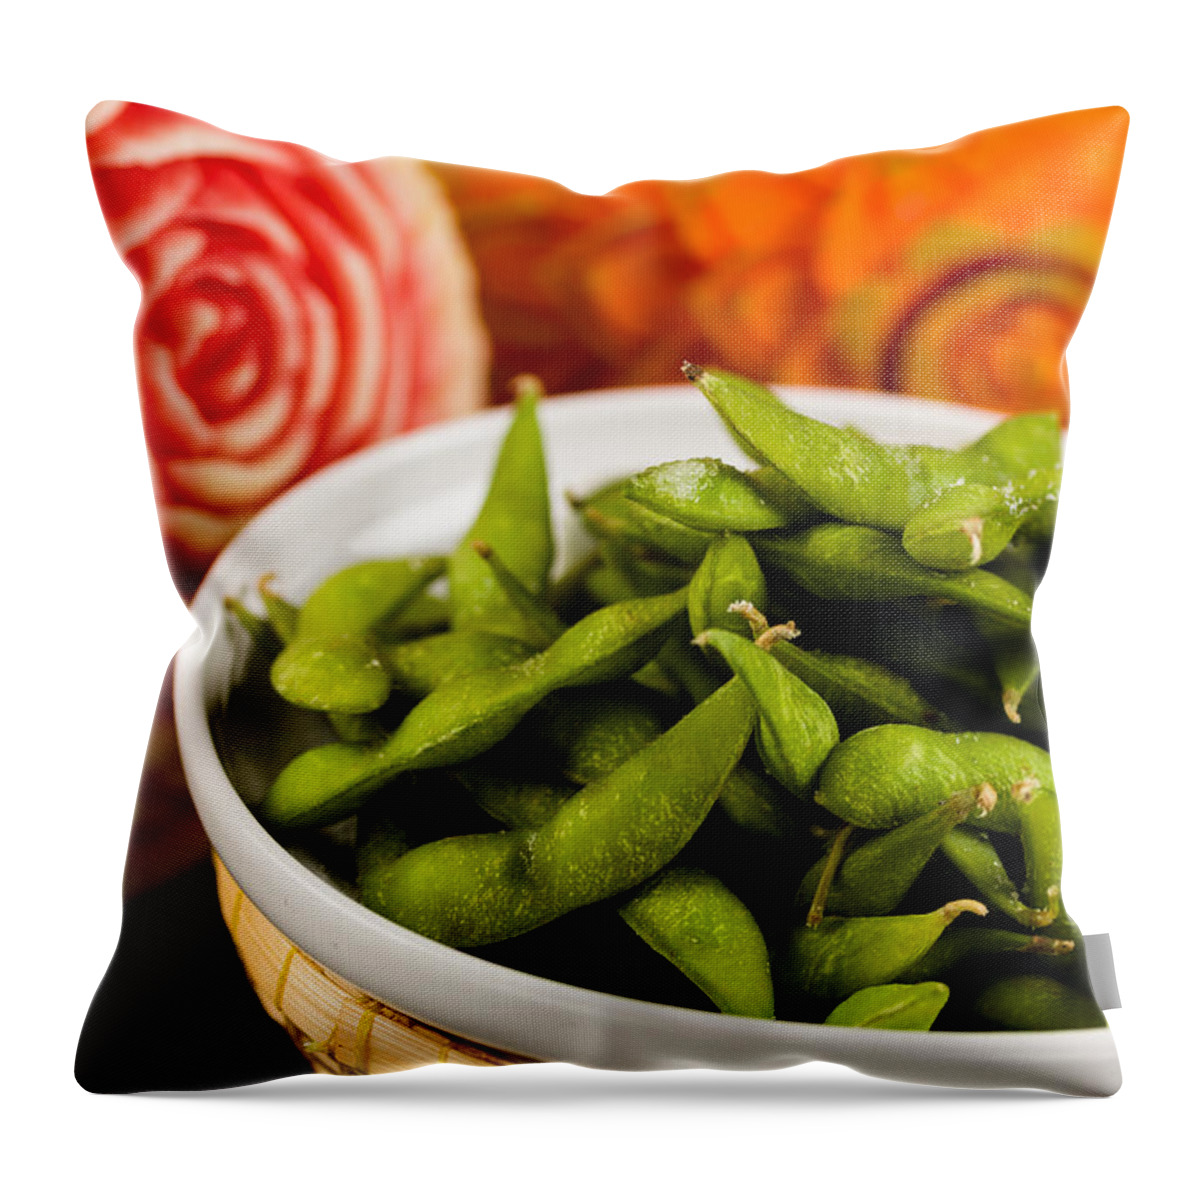 Asian Throw Pillow featuring the photograph Edamame by Raul Rodriguez